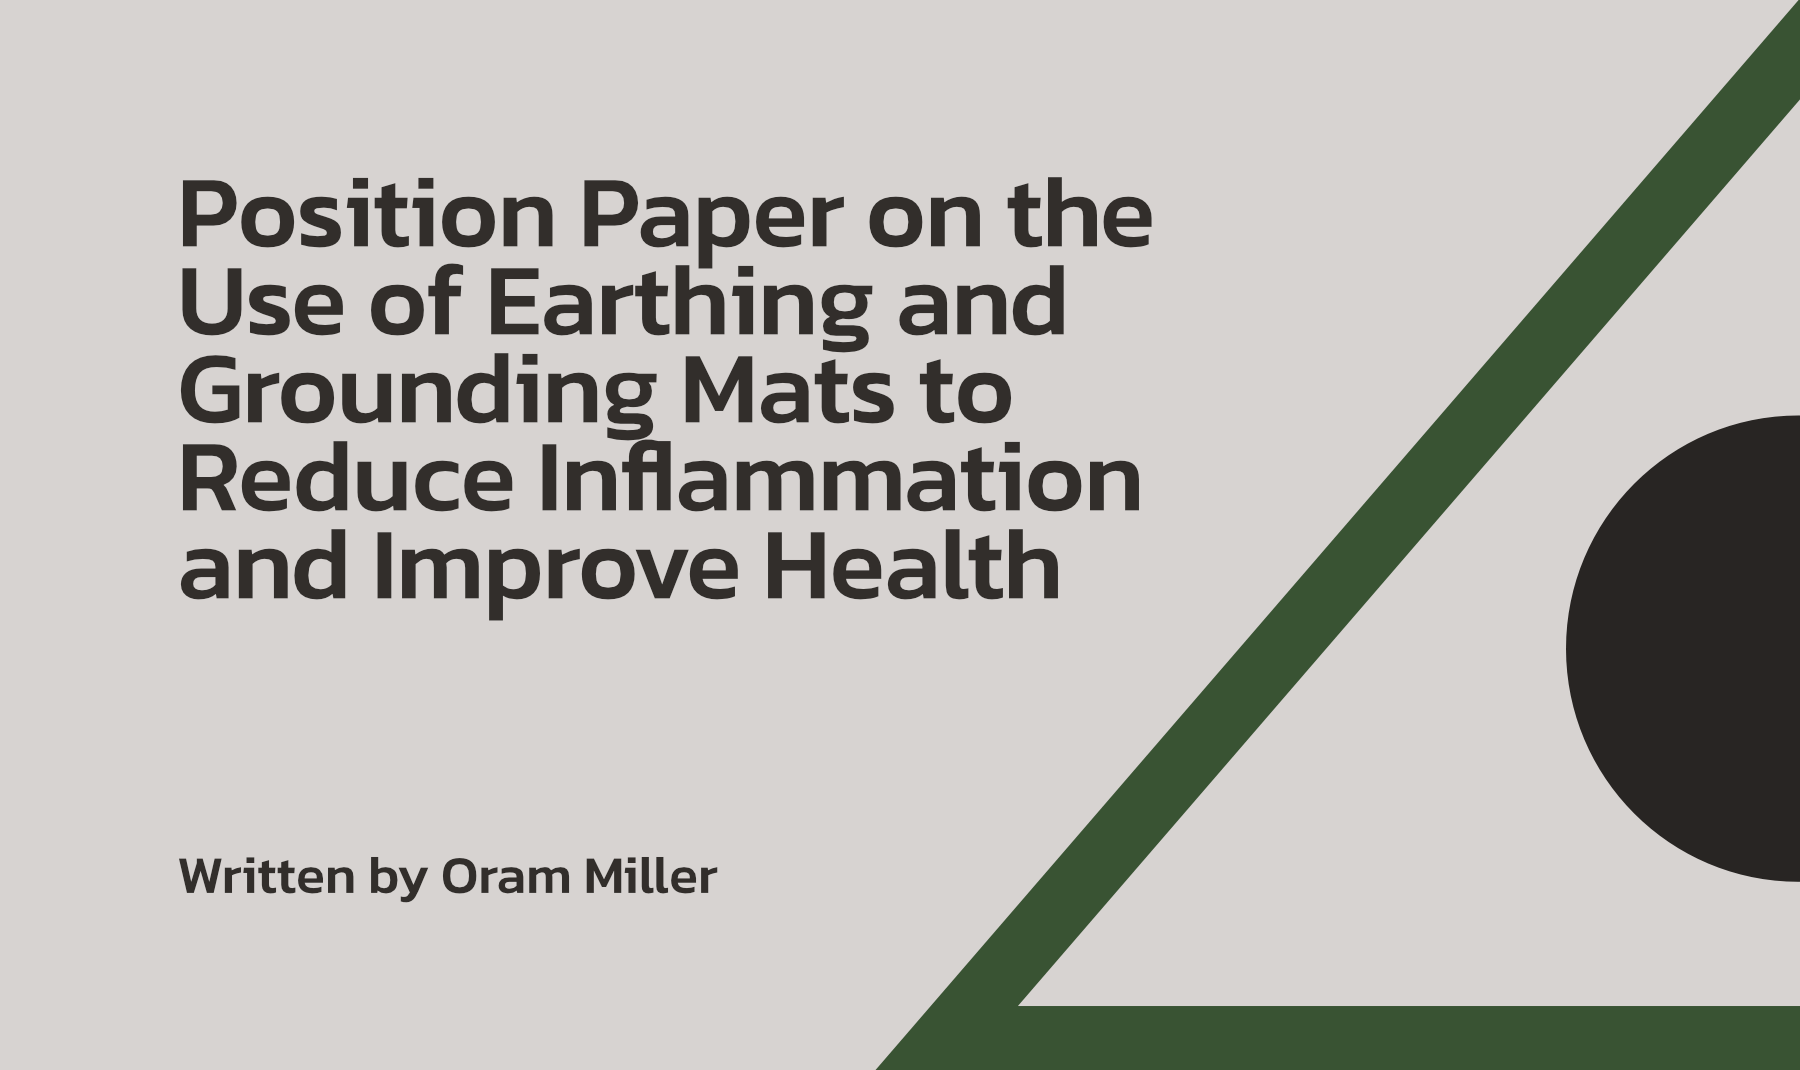 Position Paper on the Use of Earthing and Grounding Mats to Reduce Inflammation and Improve Health